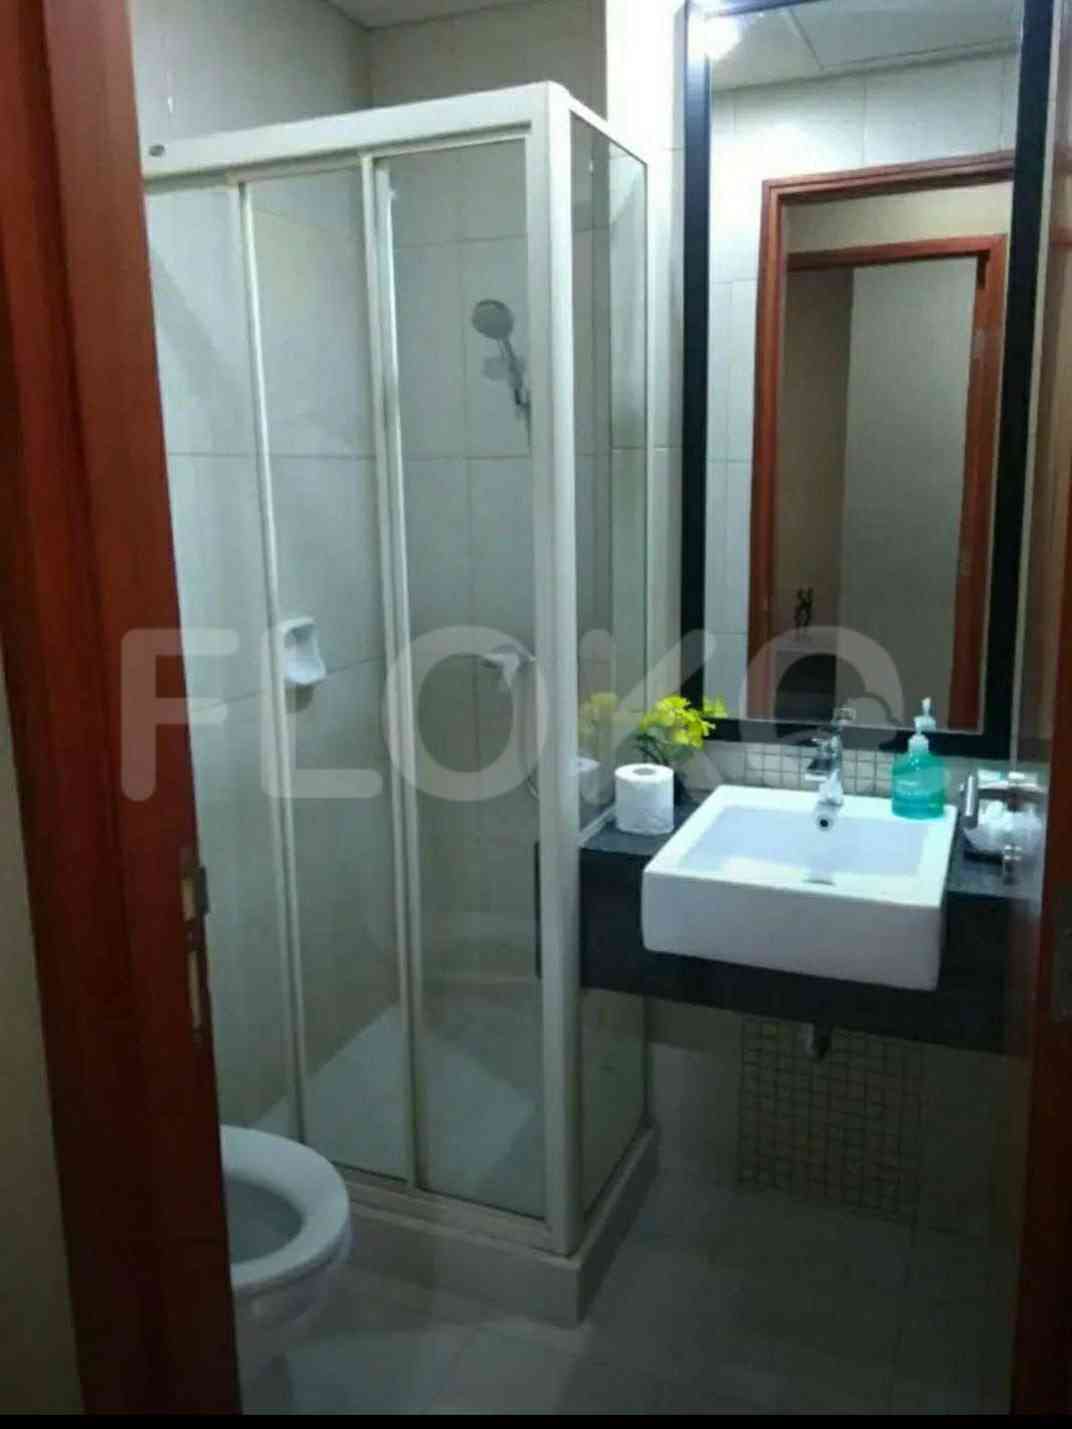 2 Bedroom on nullth Floor for Rent in Kuningan Place Apartment - fku453 5